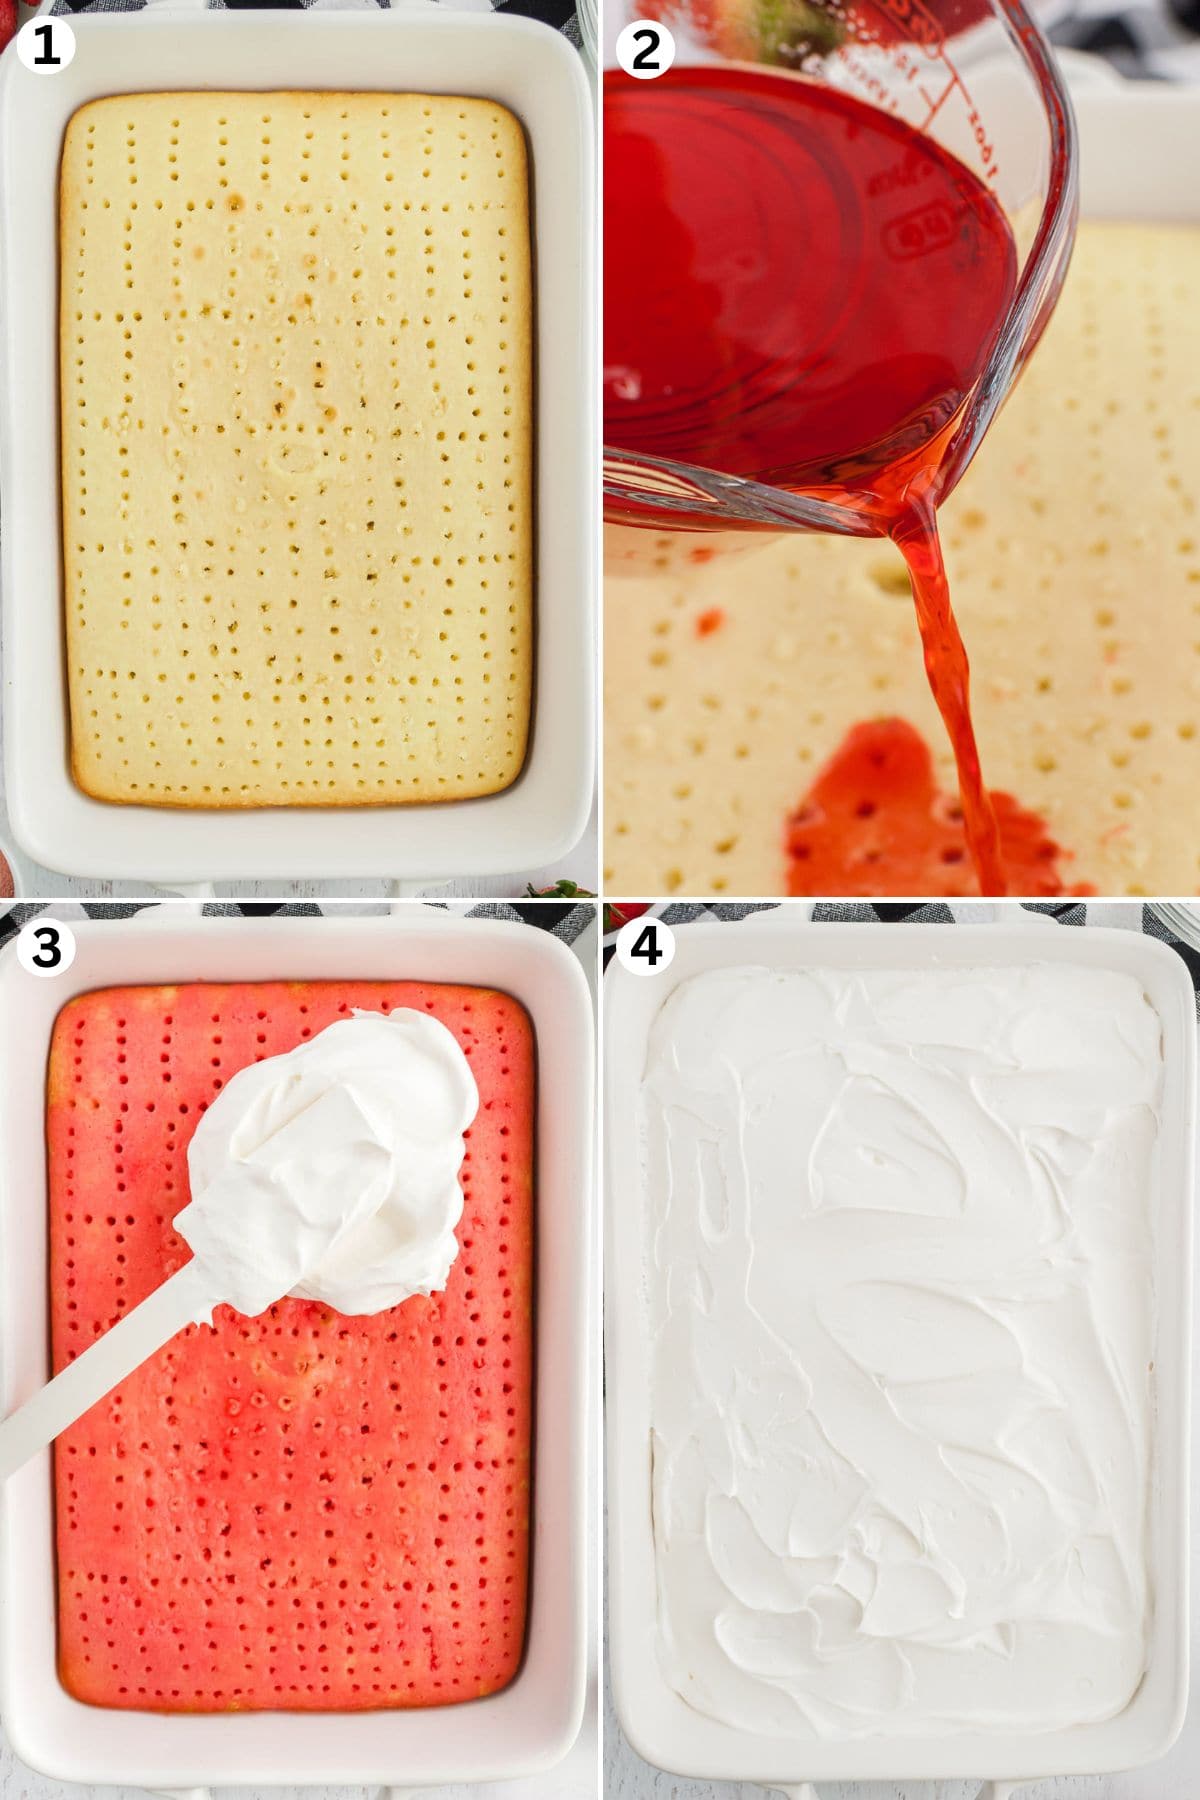 bake the cake and poke several holes in the cake. pour the jello over the holes. cover with cool whip. 